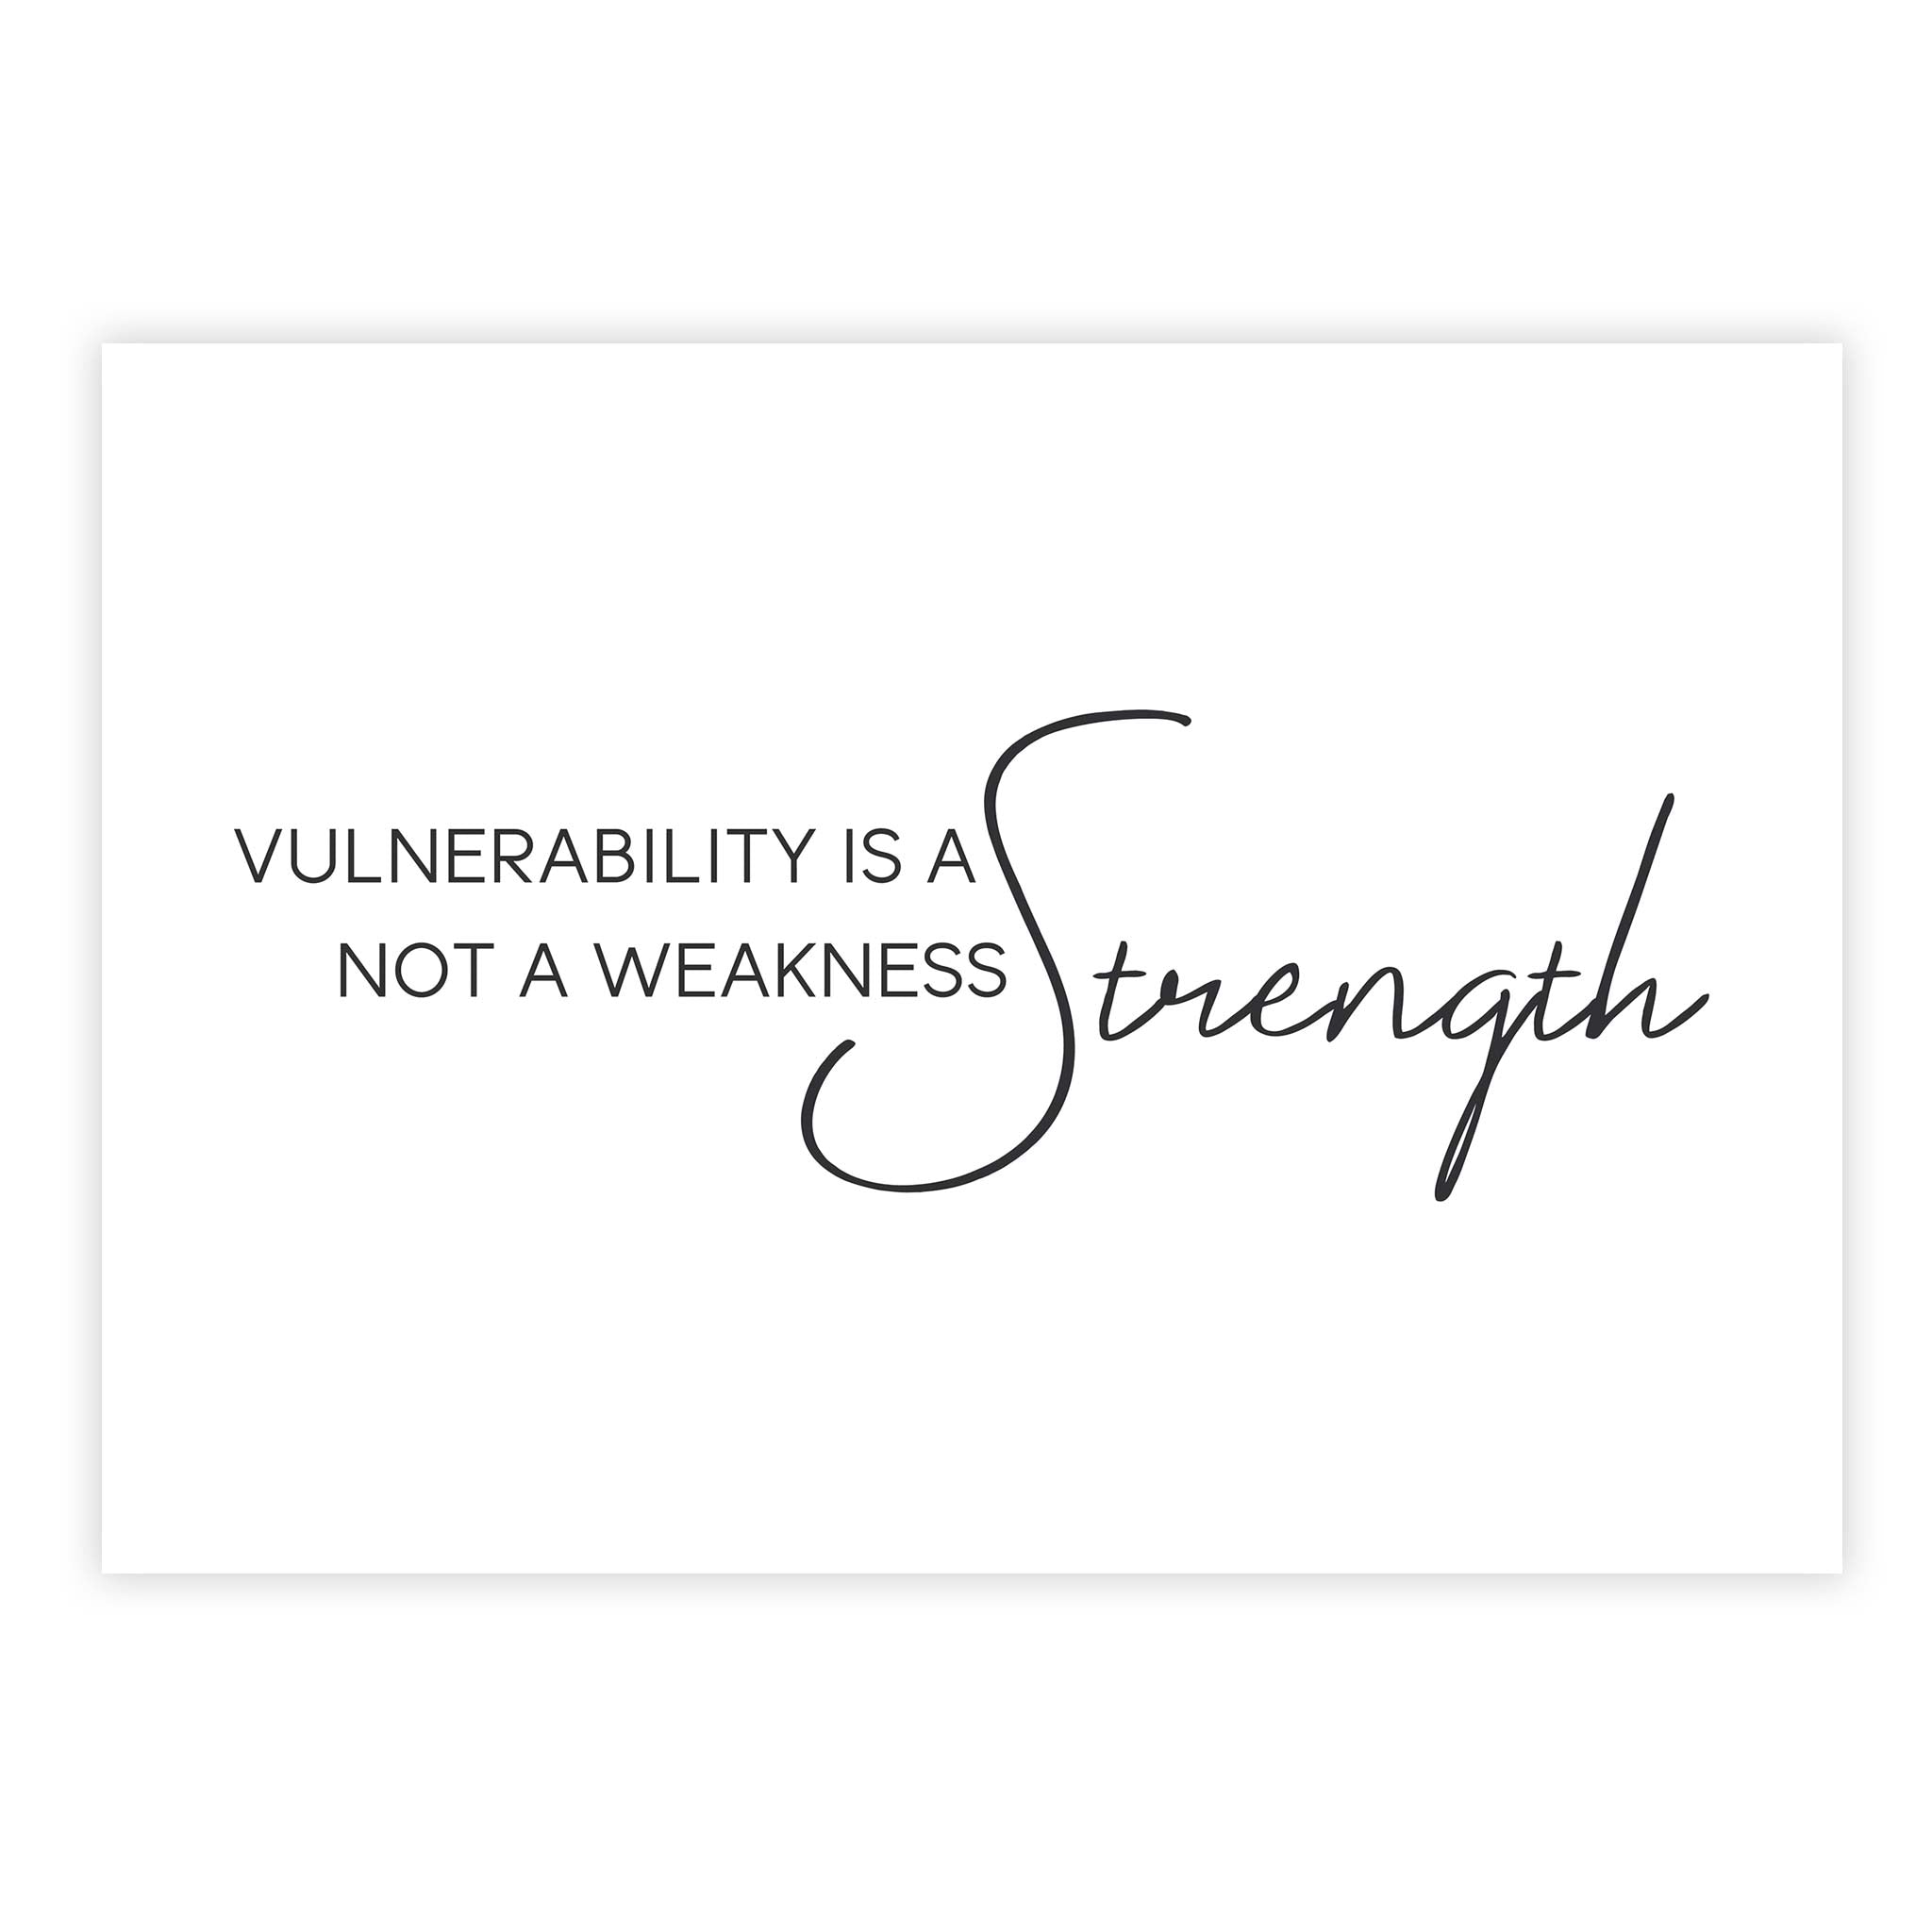 Vulnerability is a strength, not a weakness